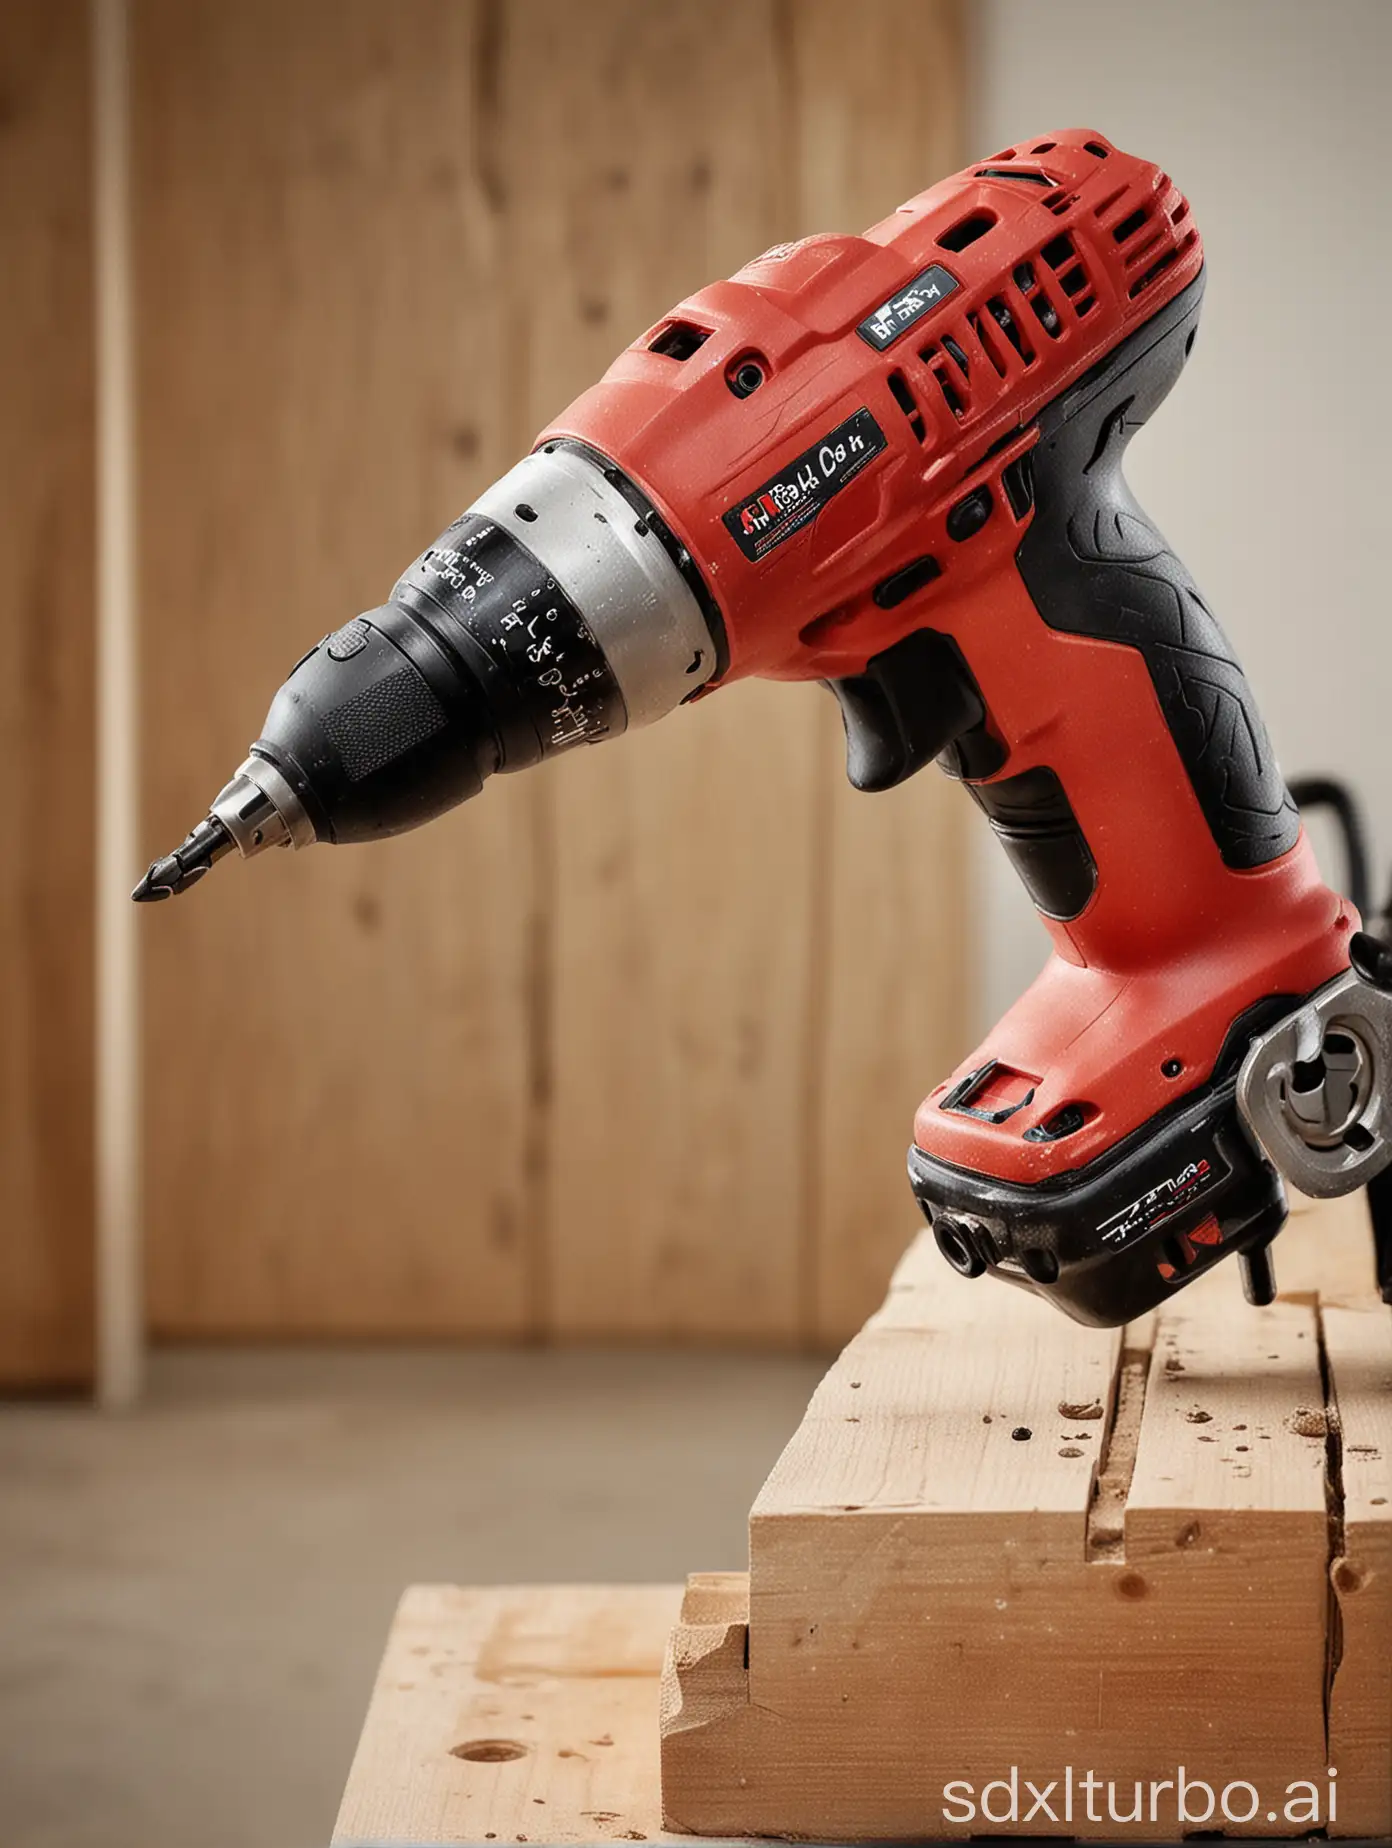 Professional-Power-Tool-HighQuality-Drill-with-Price-Tag